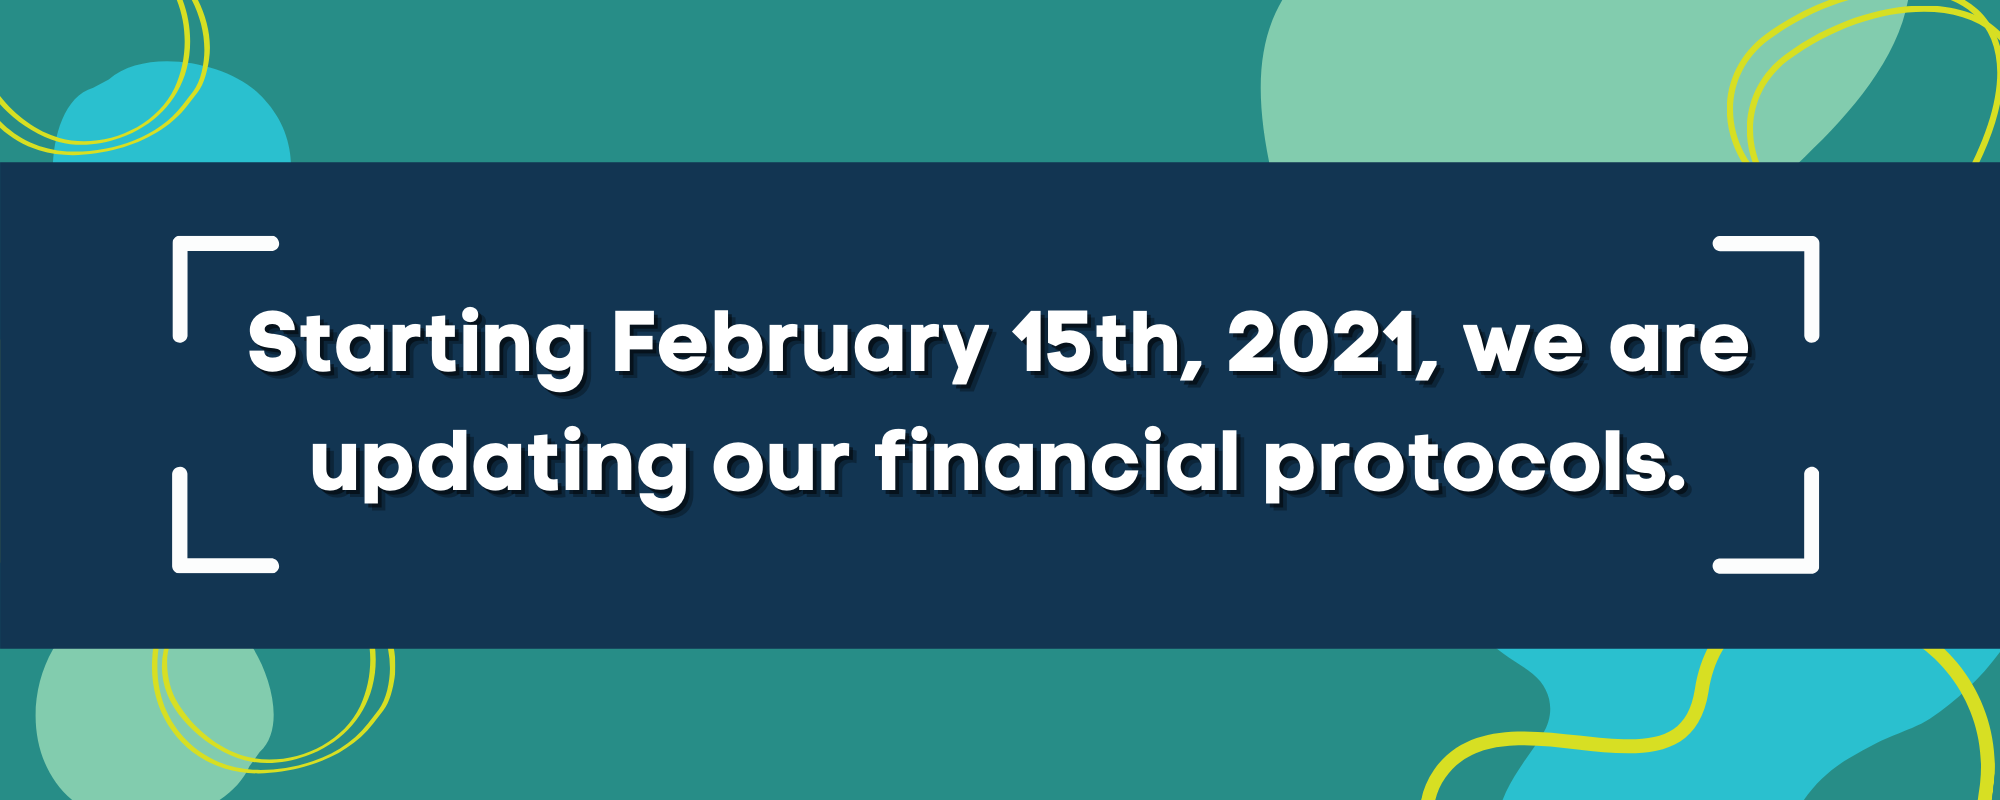 Financial Protocol Banner.png